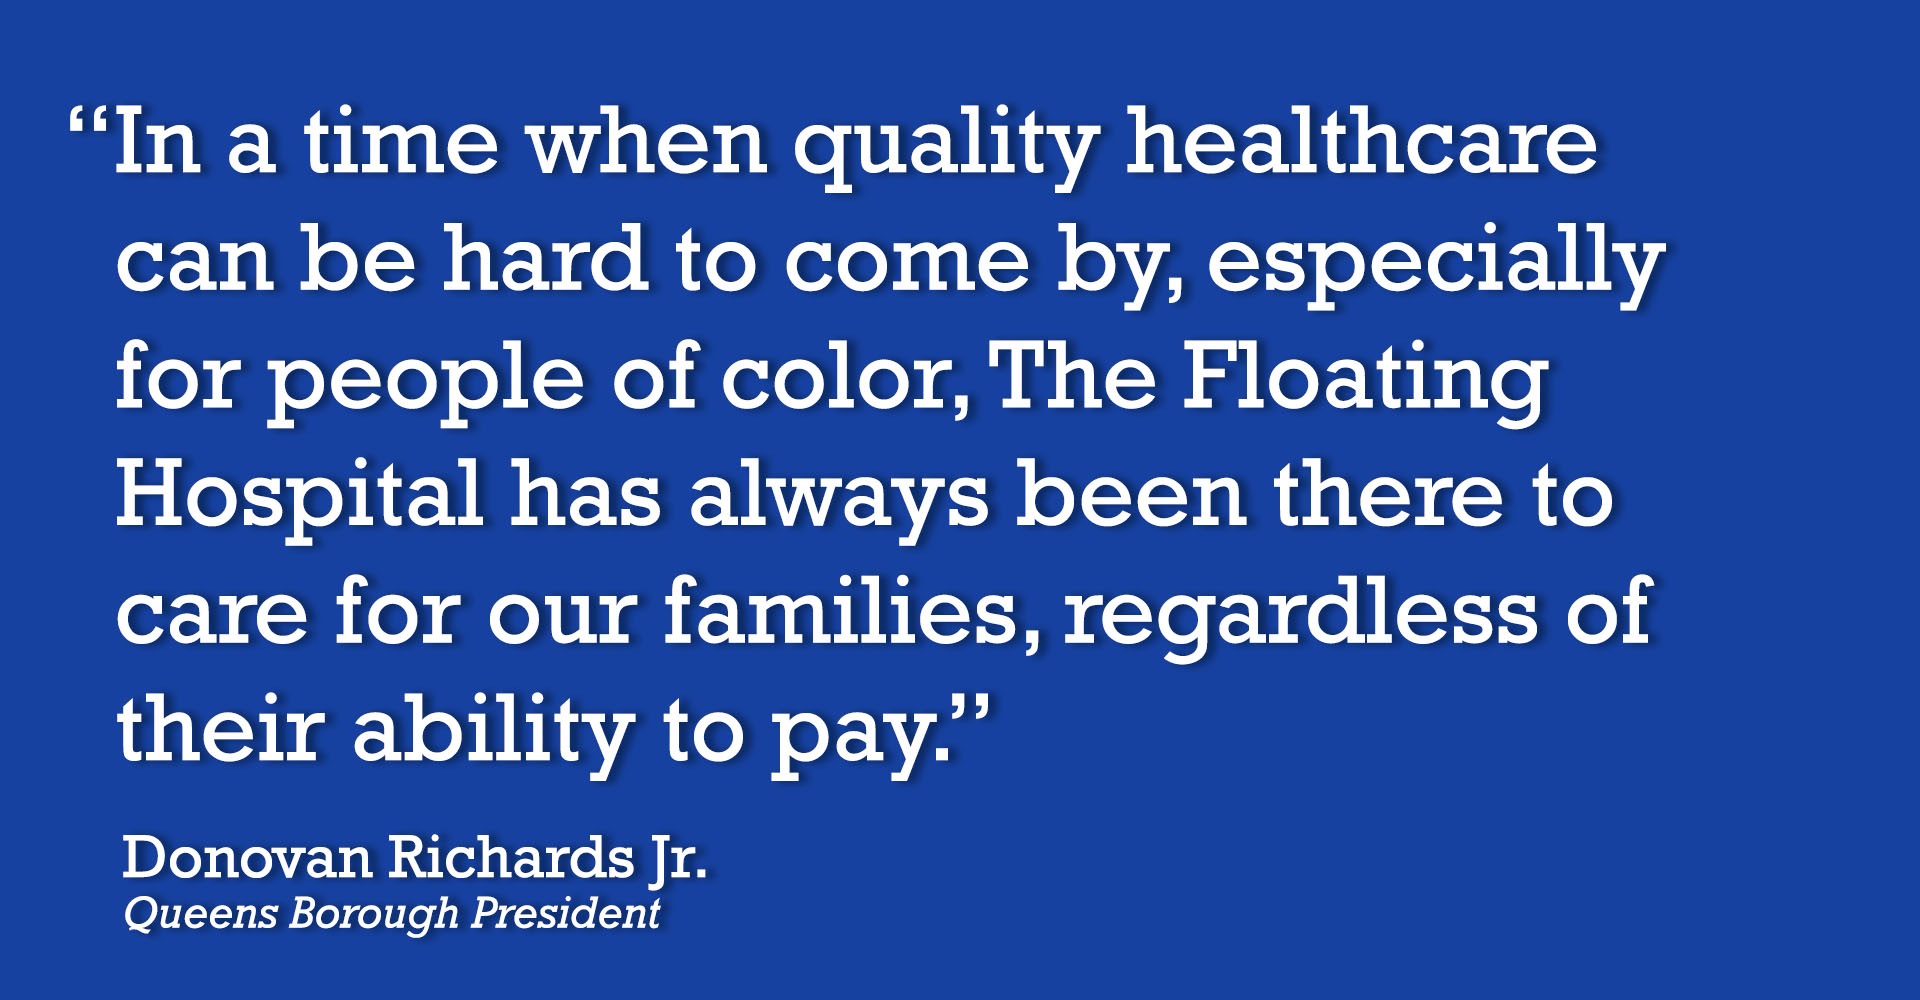 “In a time when quality healthcare can be hard to come by, especially for people of color, The Floating Hospital has always been there to care for our families, regardless of their ability to pay.” -- Donovan Richards Jr., Queens Borough President